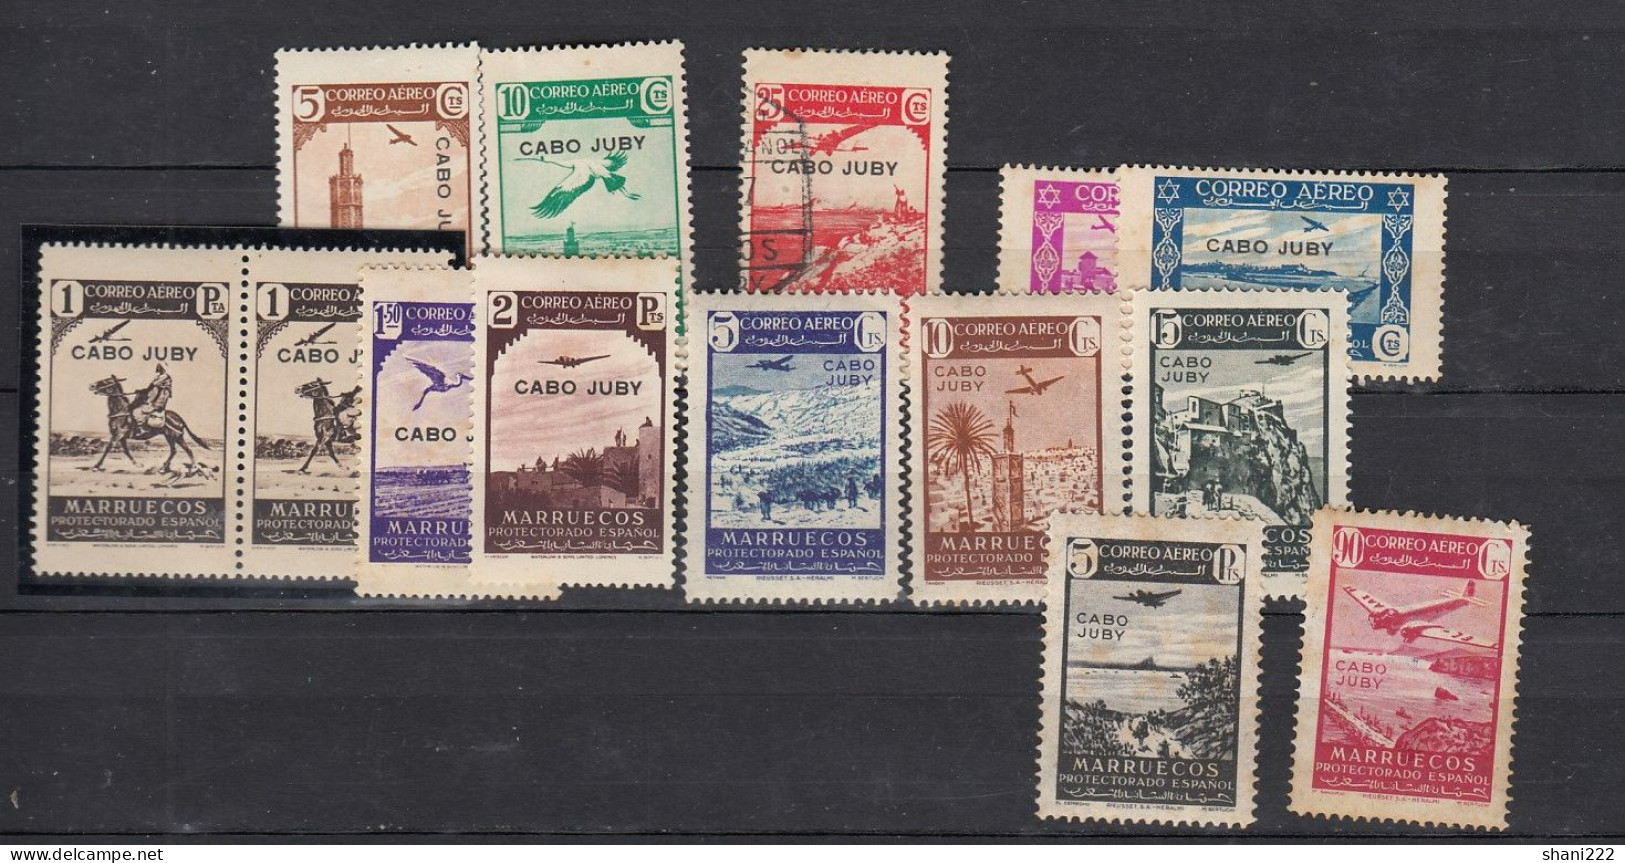 Spain - Cabo Juby - 1938-42 - Airs -  MH (2-156) - Cape Juby